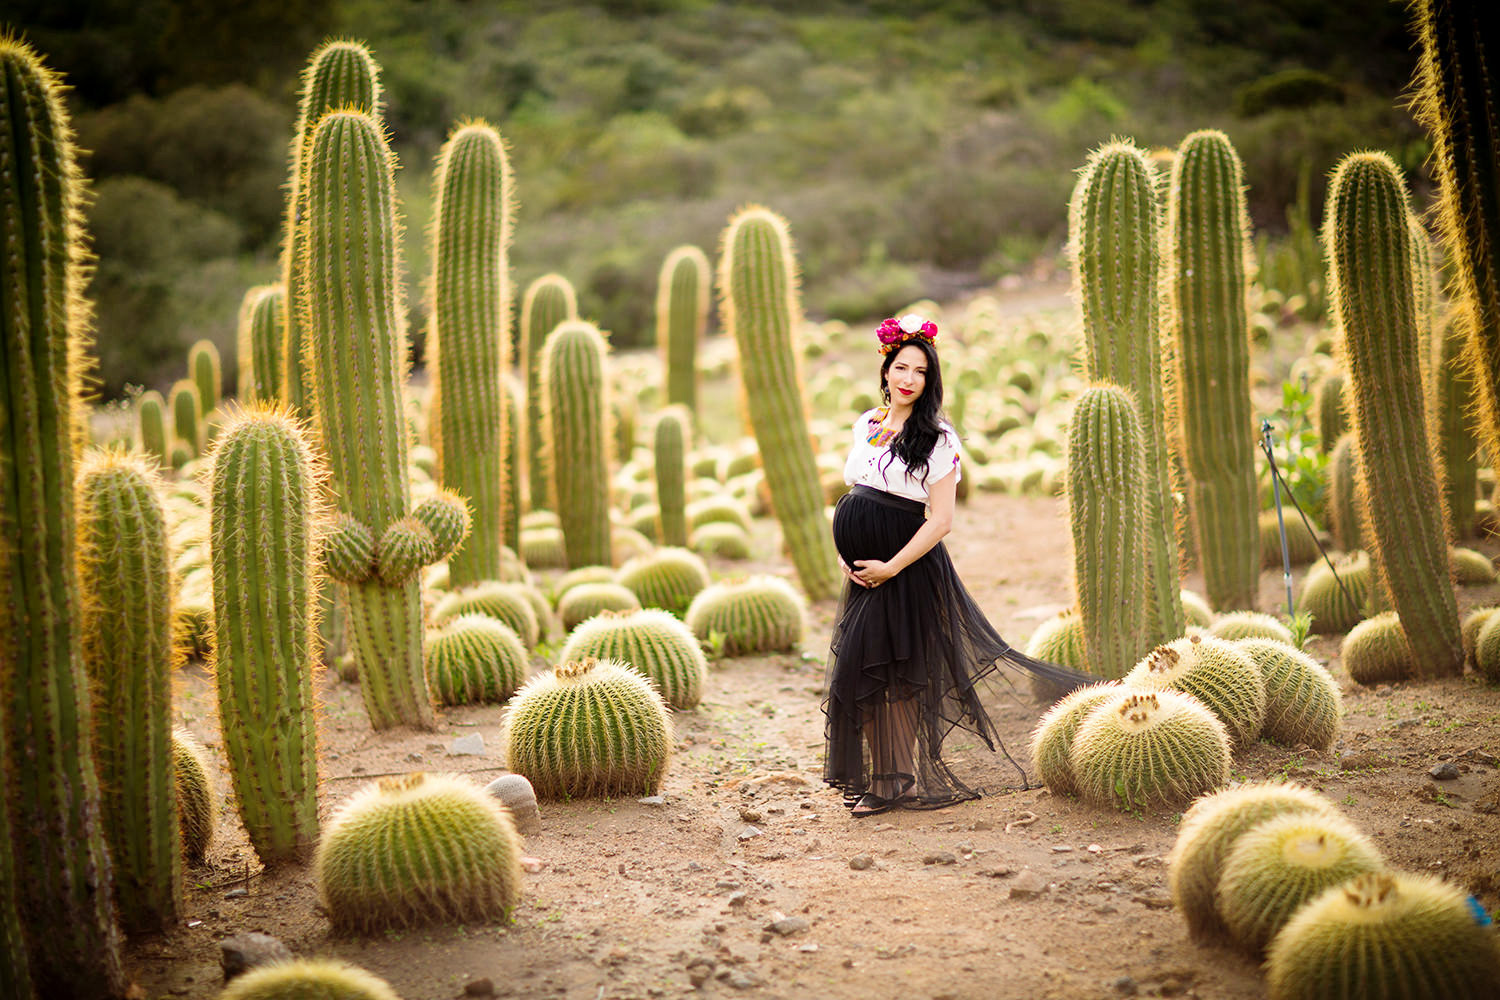 Artistic Maternity Session at cactus garden in San Diego.